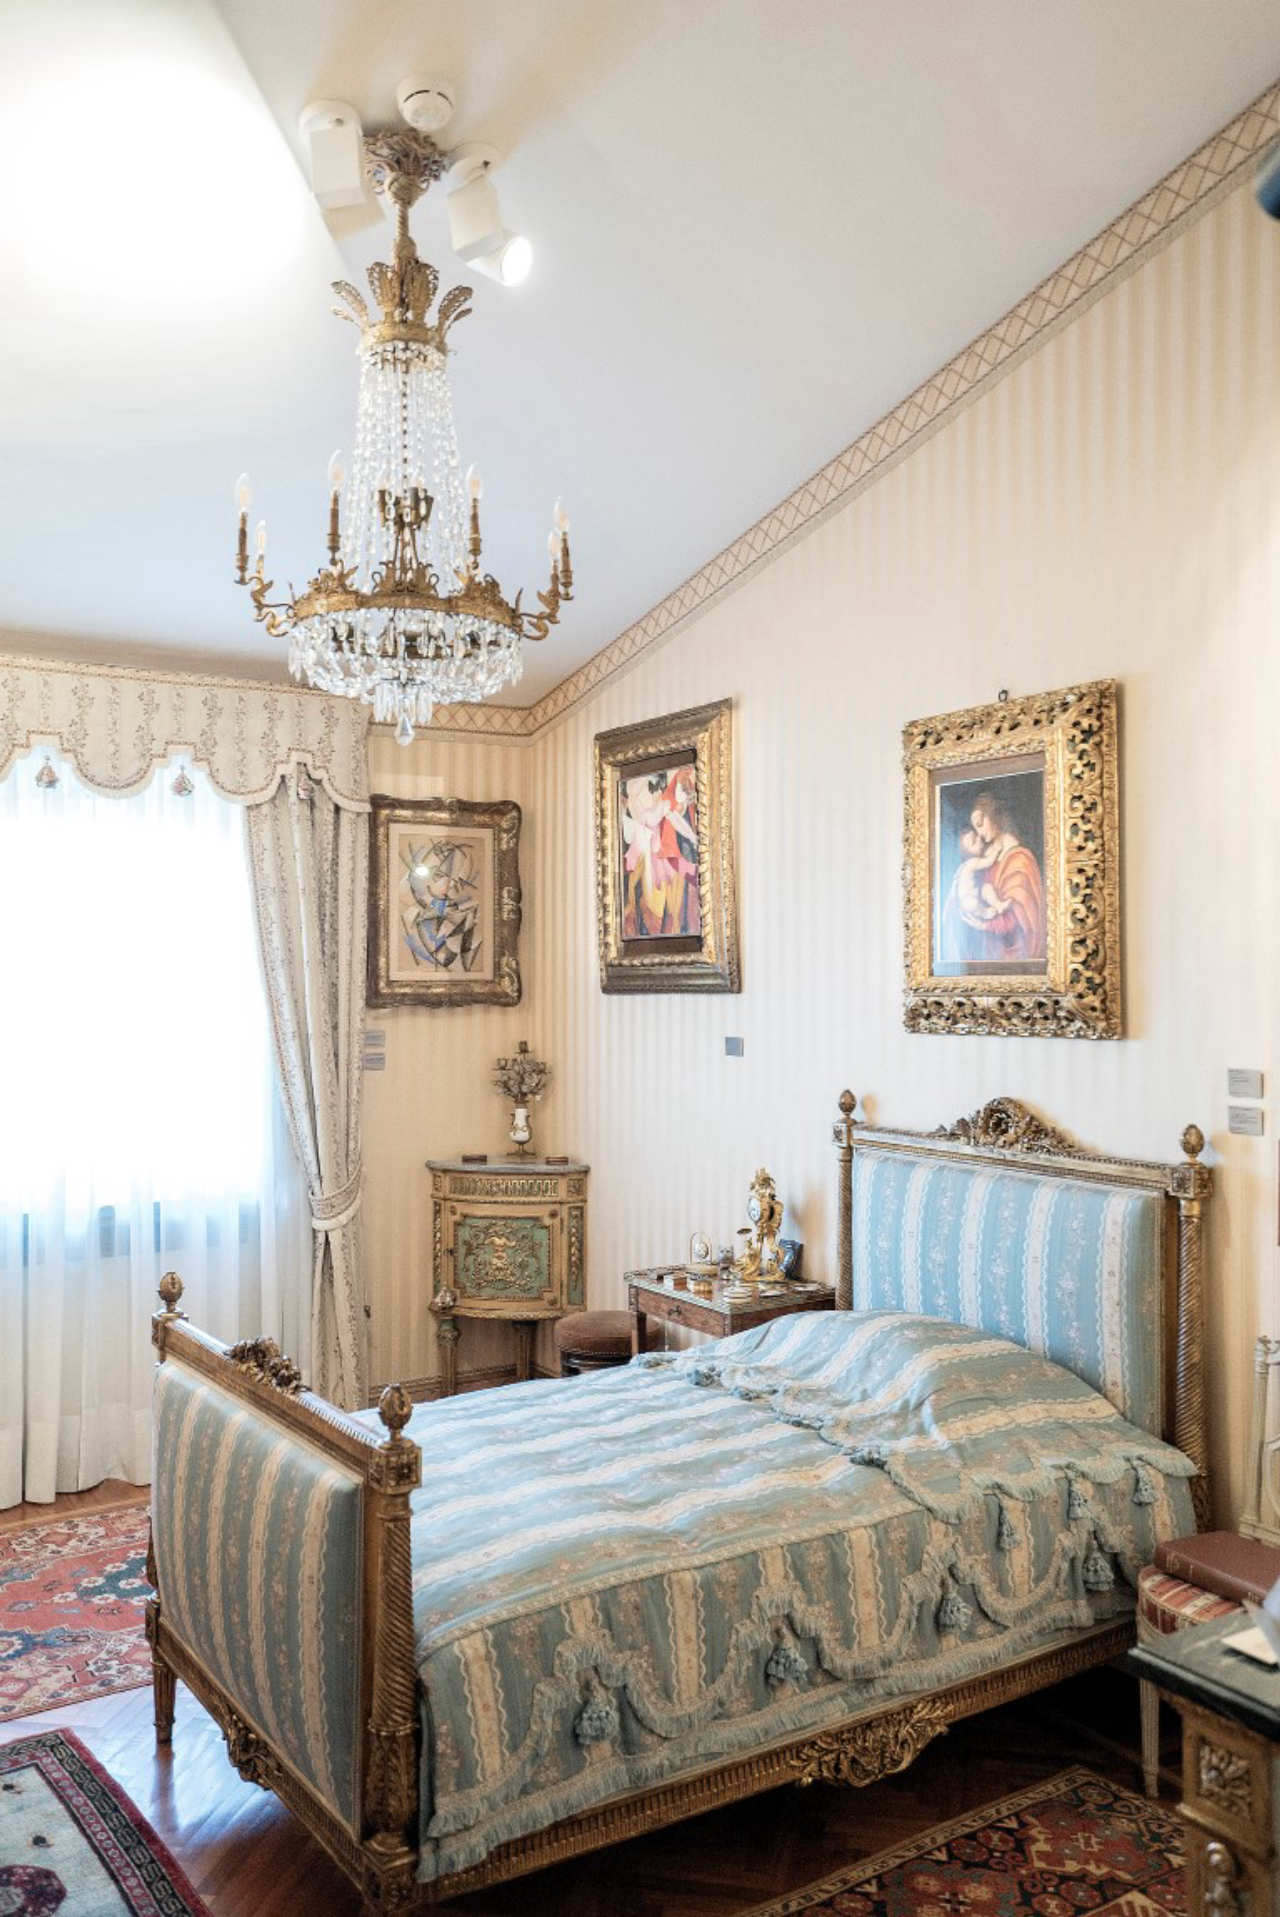 A bedroom at Francesco Federico Cerruti’s villa in Rivoli, Italy, May 1, 2019. Few knew that Cerruti, who died in 2015, owned artwork that would later be valued at $600 million. (Alessandro Grassani/The New York Times)